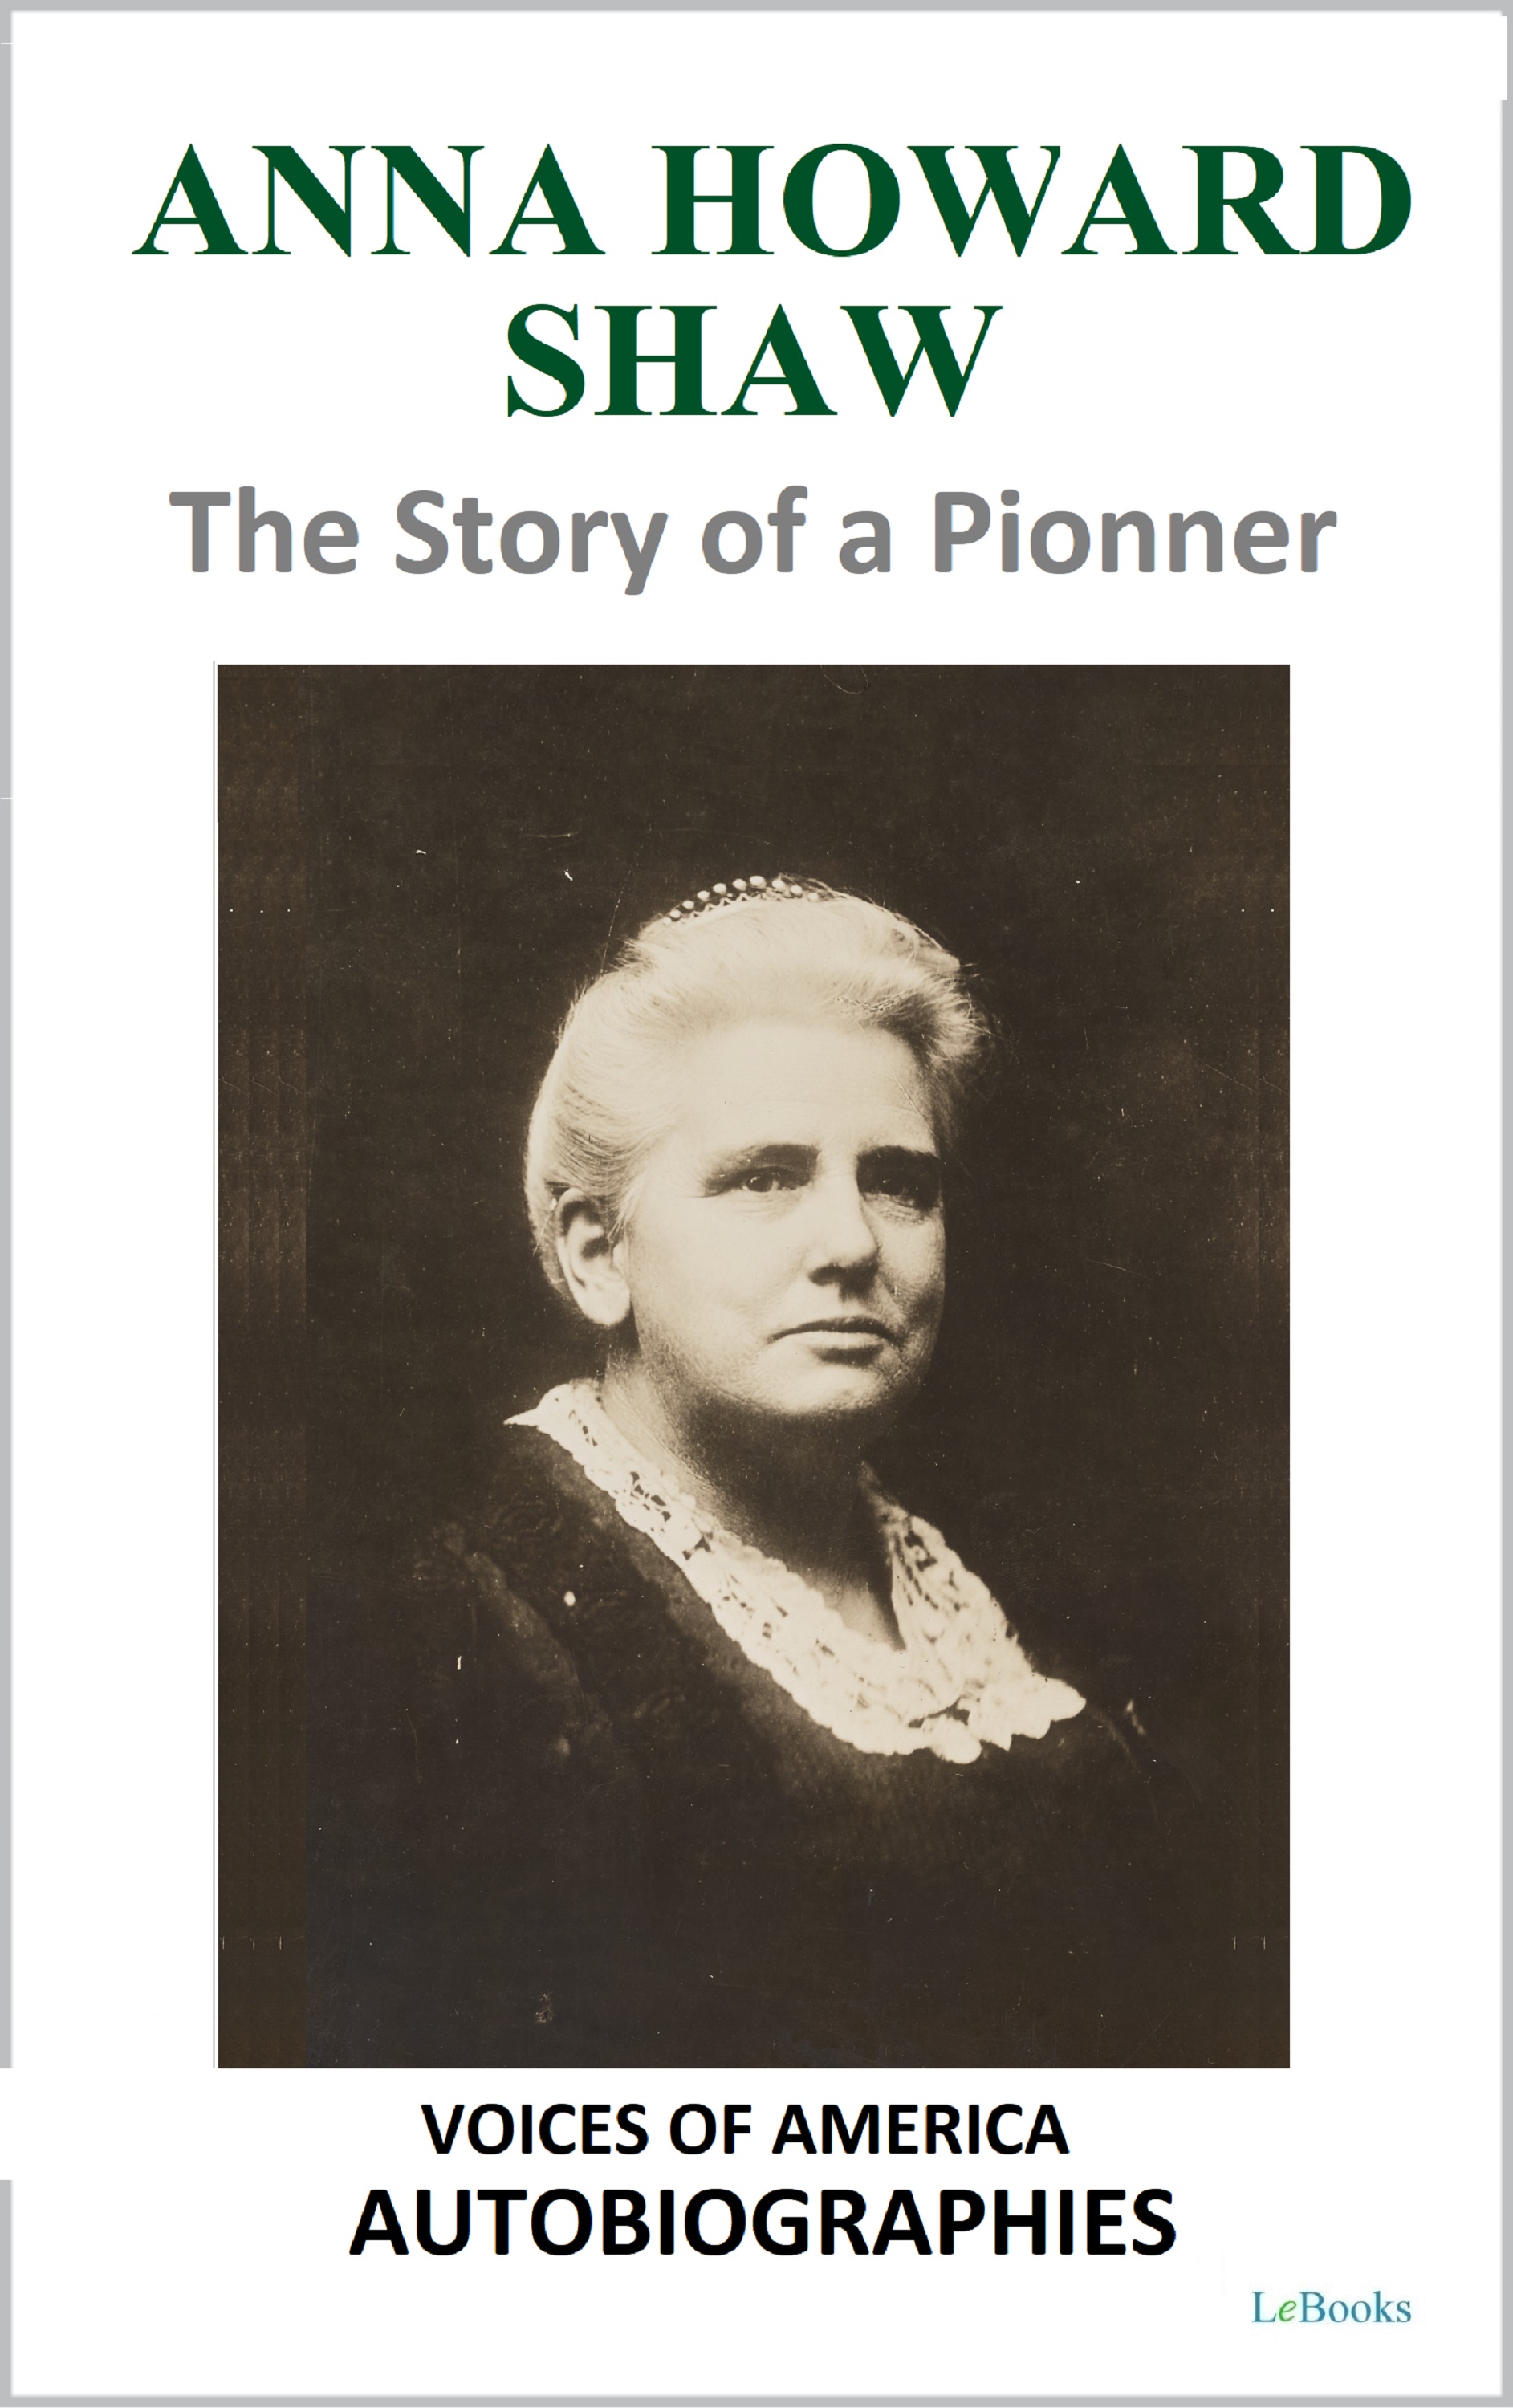 Anna Howard Shaw - The Story of a Pioneer